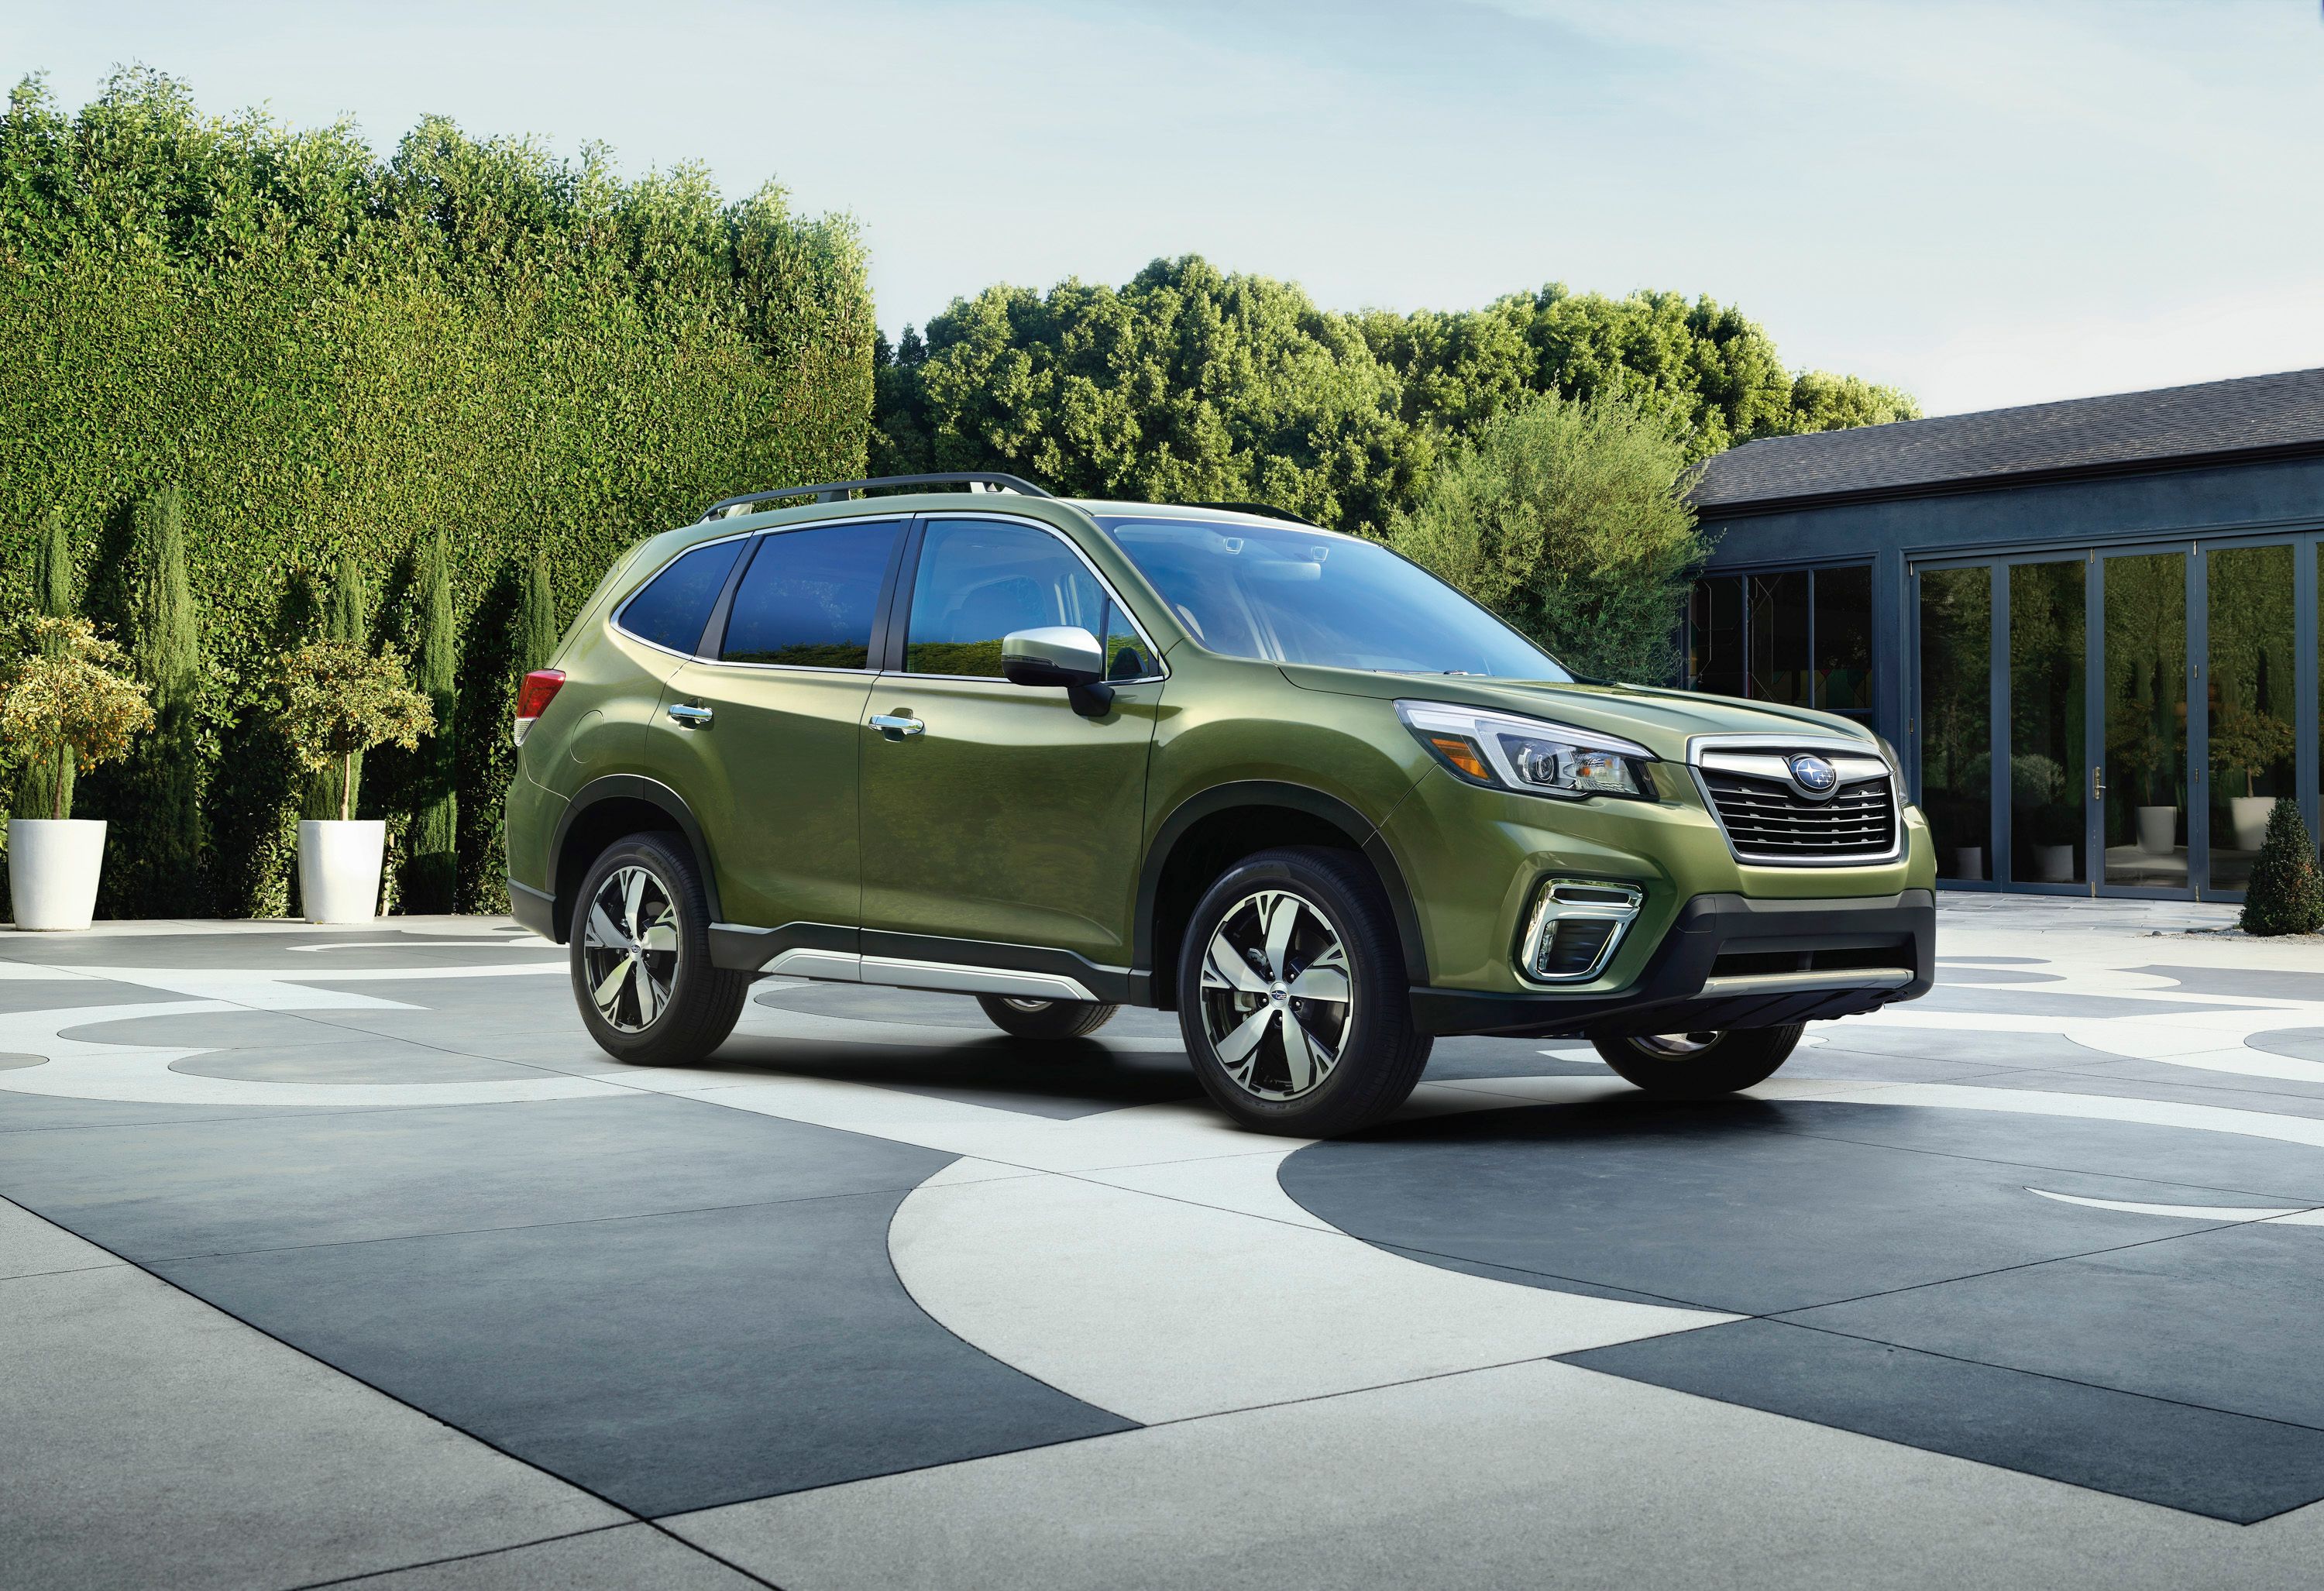 2016 - 2018 2019 Subaru Forester Adds Size And Safety, Scraps Turbo And Manual Gearbox